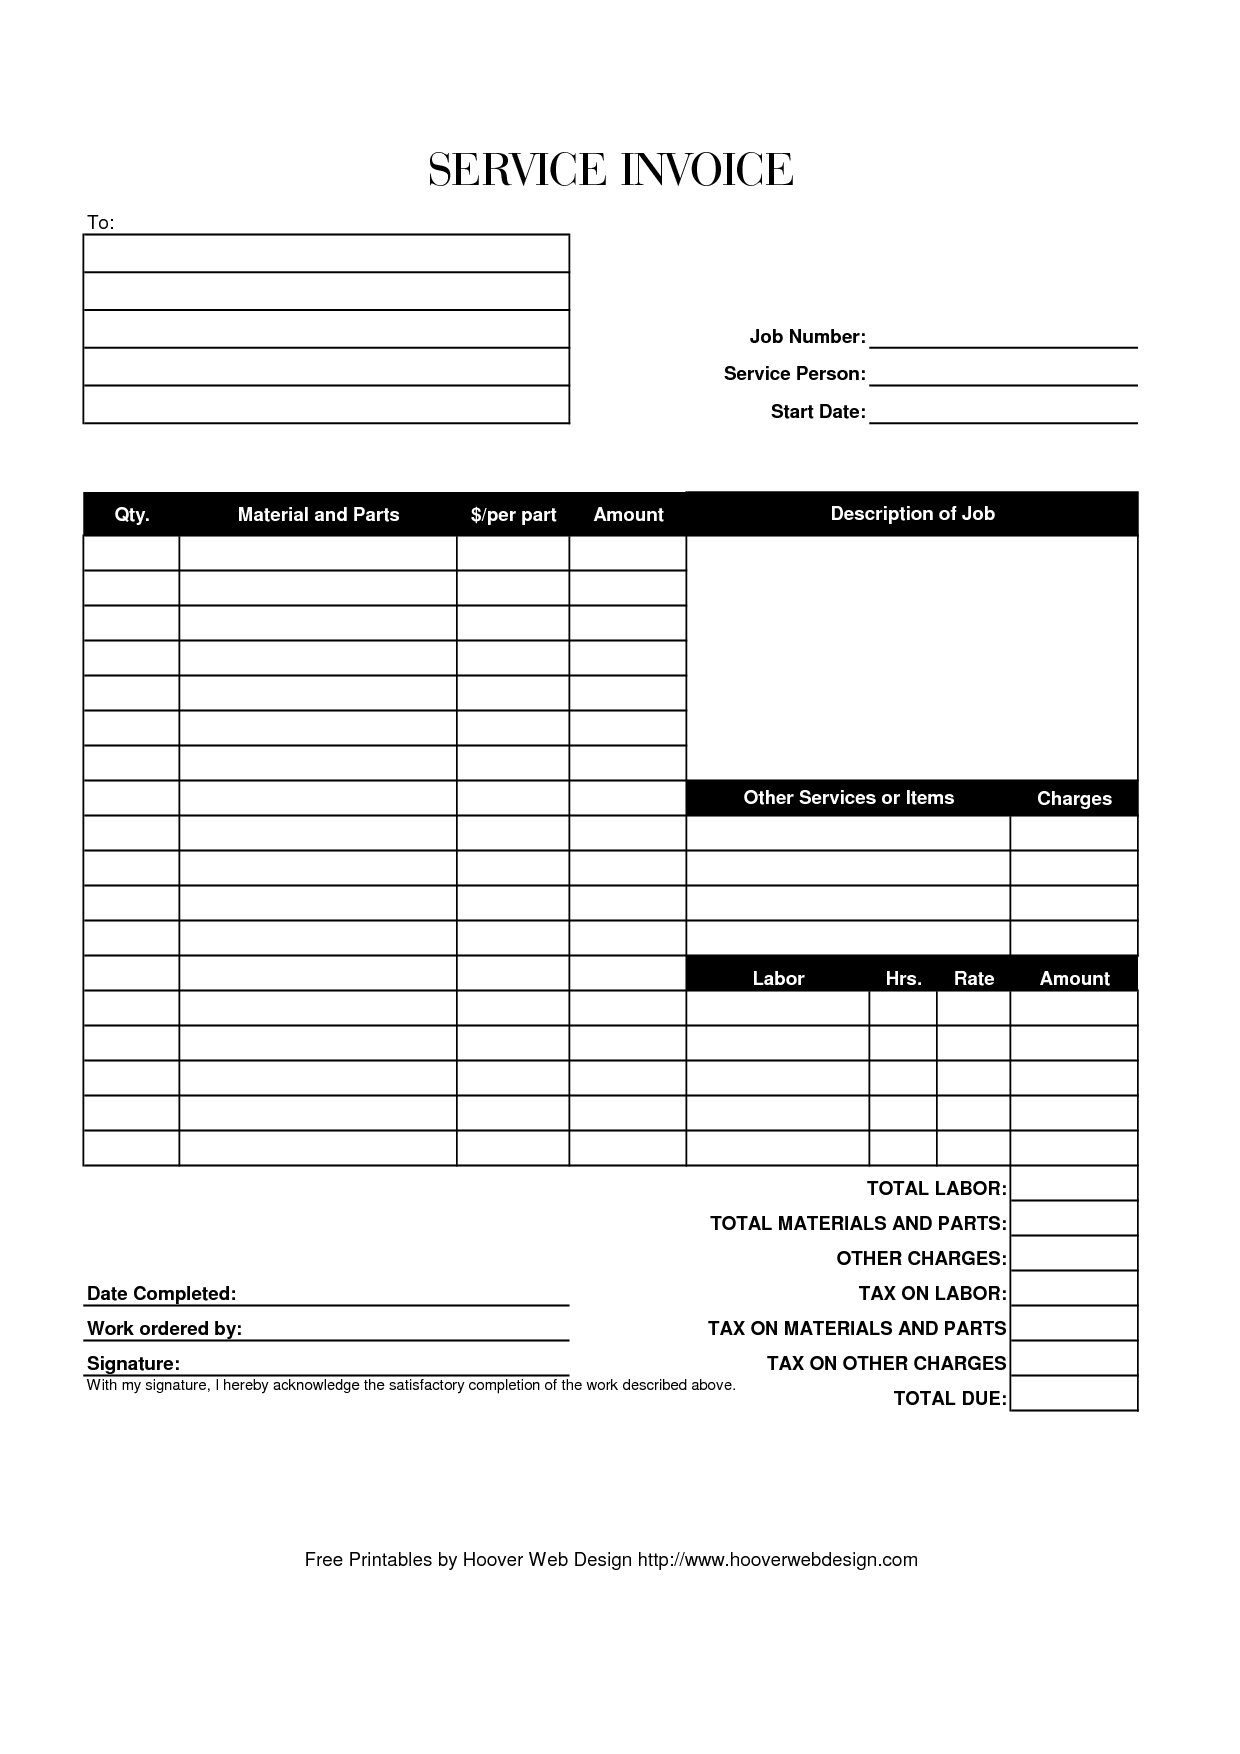 14 questions to ask at blank the invoice and resume template free